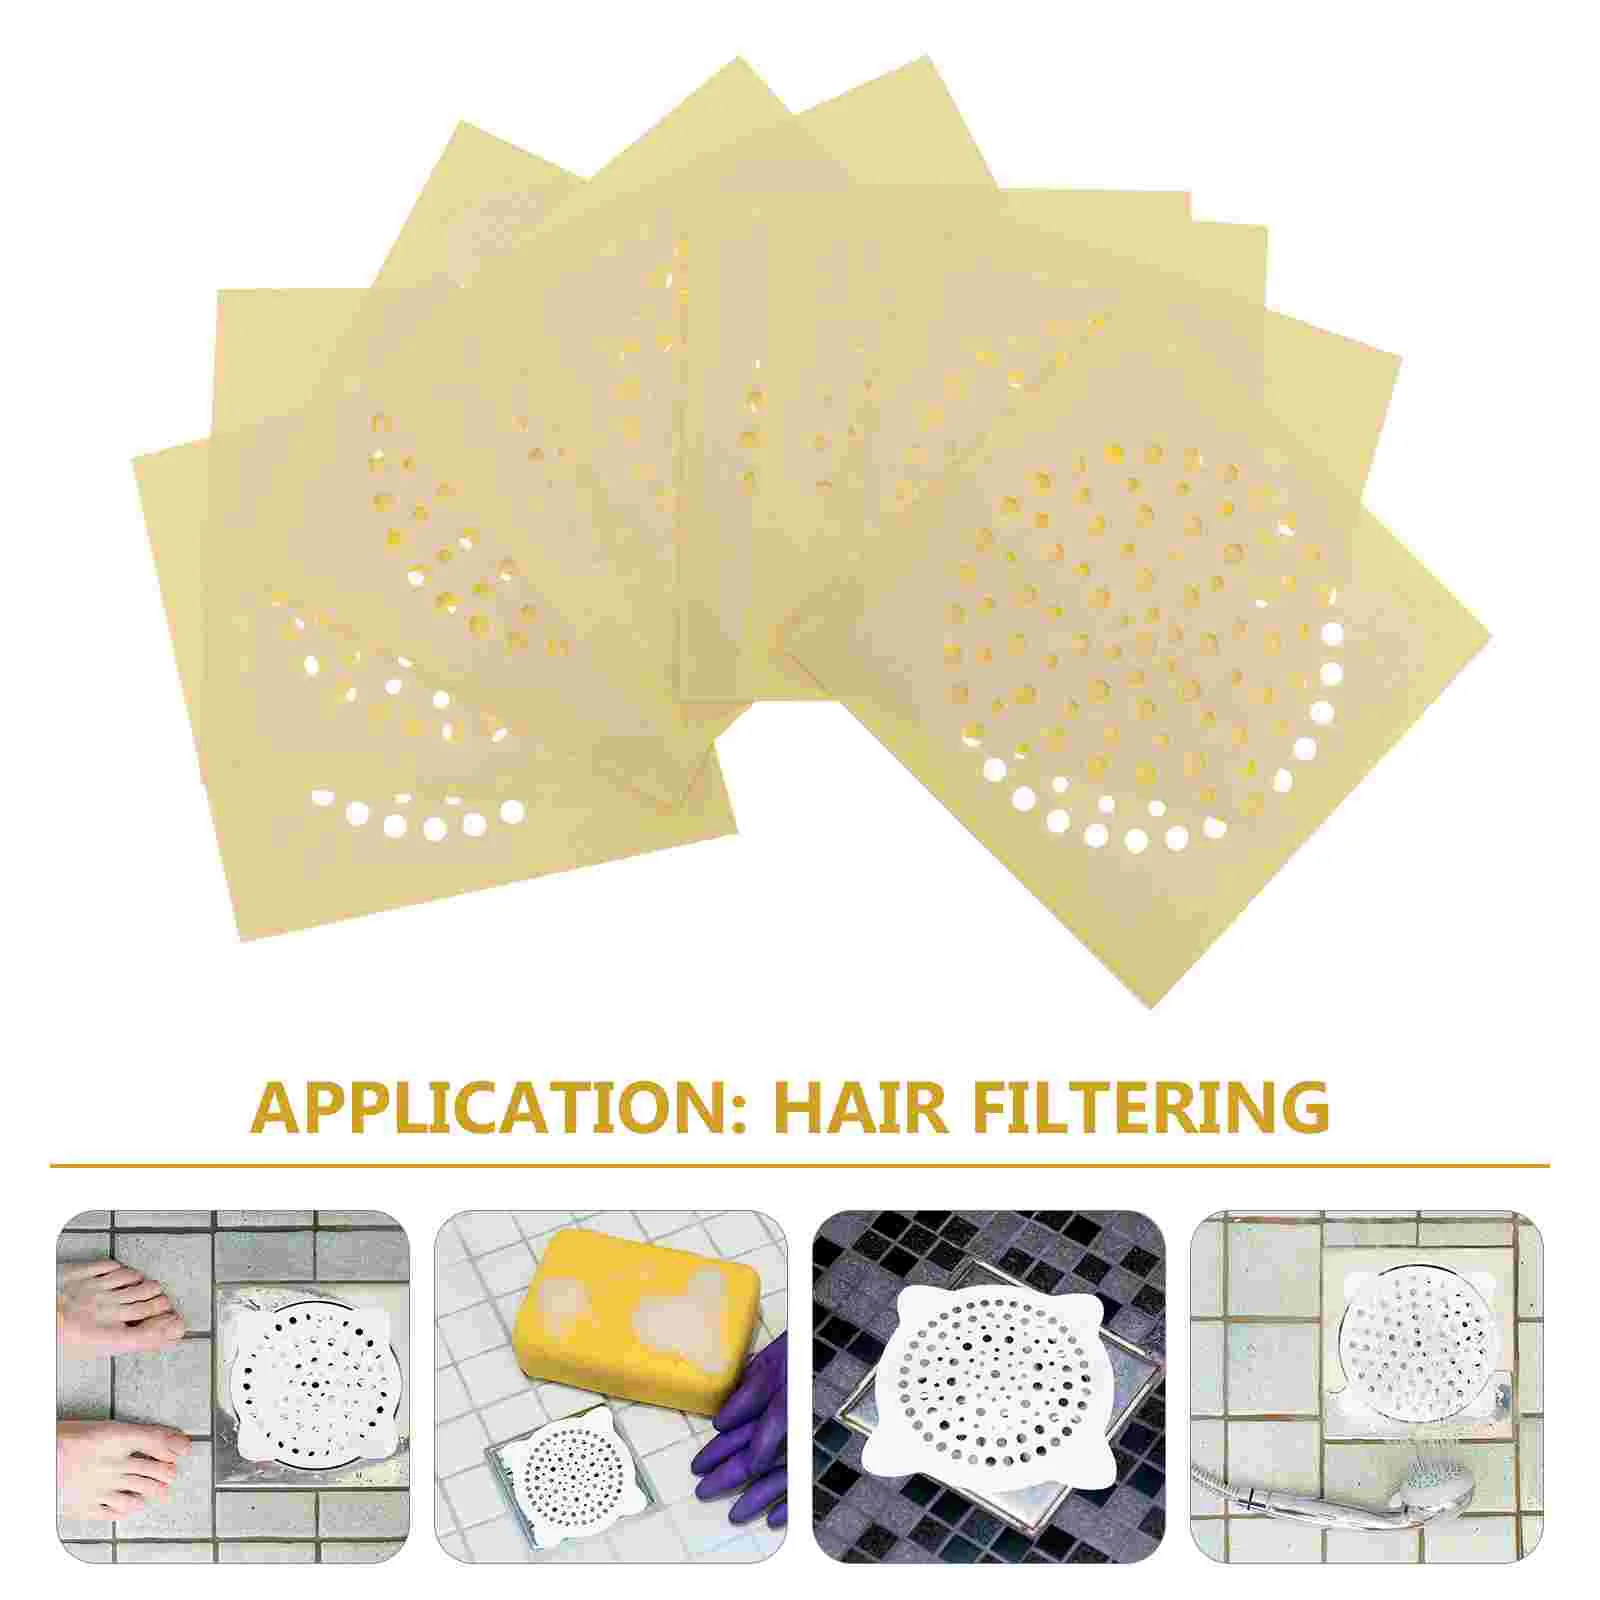 

50 Pcs Floor Drain Filter Stickers Hair Hole Filtering Sink Anti-blocking Strainer Cover Toilet Adhesive Tub